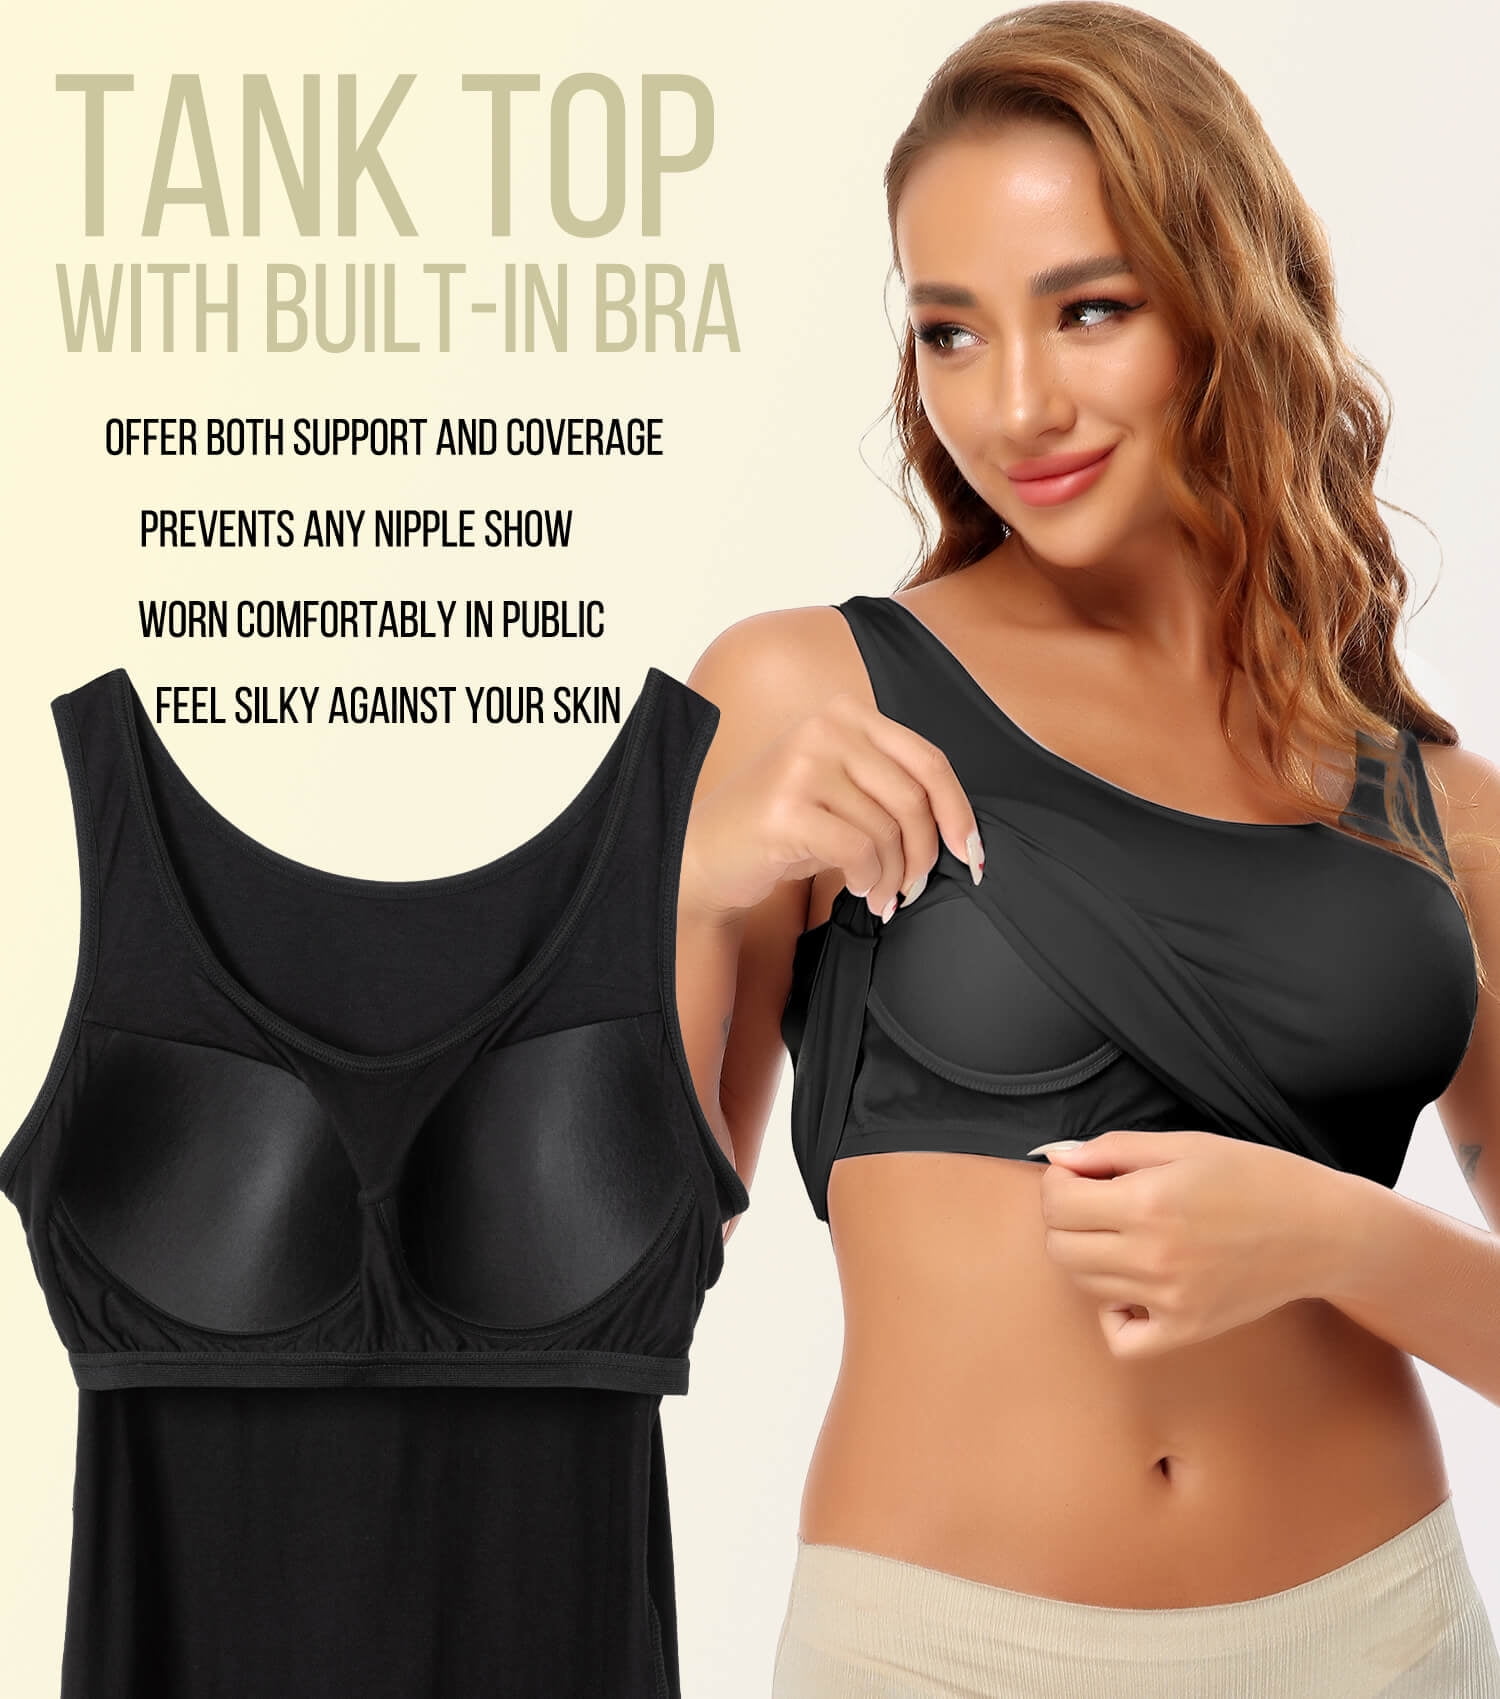 Woman Cami Tops With Built In Bra. Face Swap. Insert Your Face ID:1664844